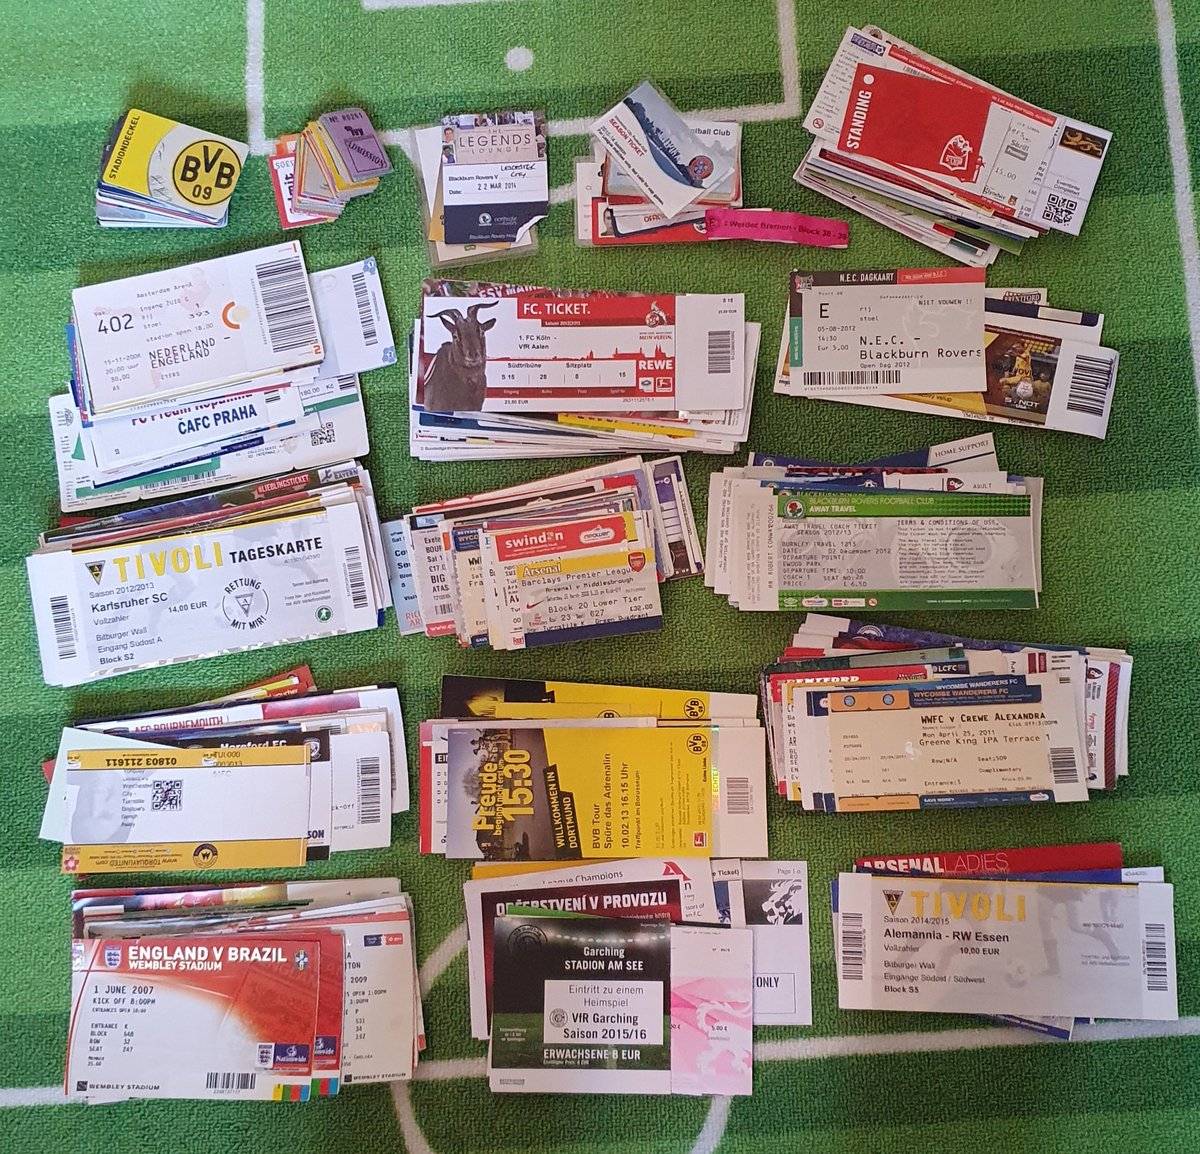 Sorting through my match tickets today. Will be posting some of my favourites in a thread below